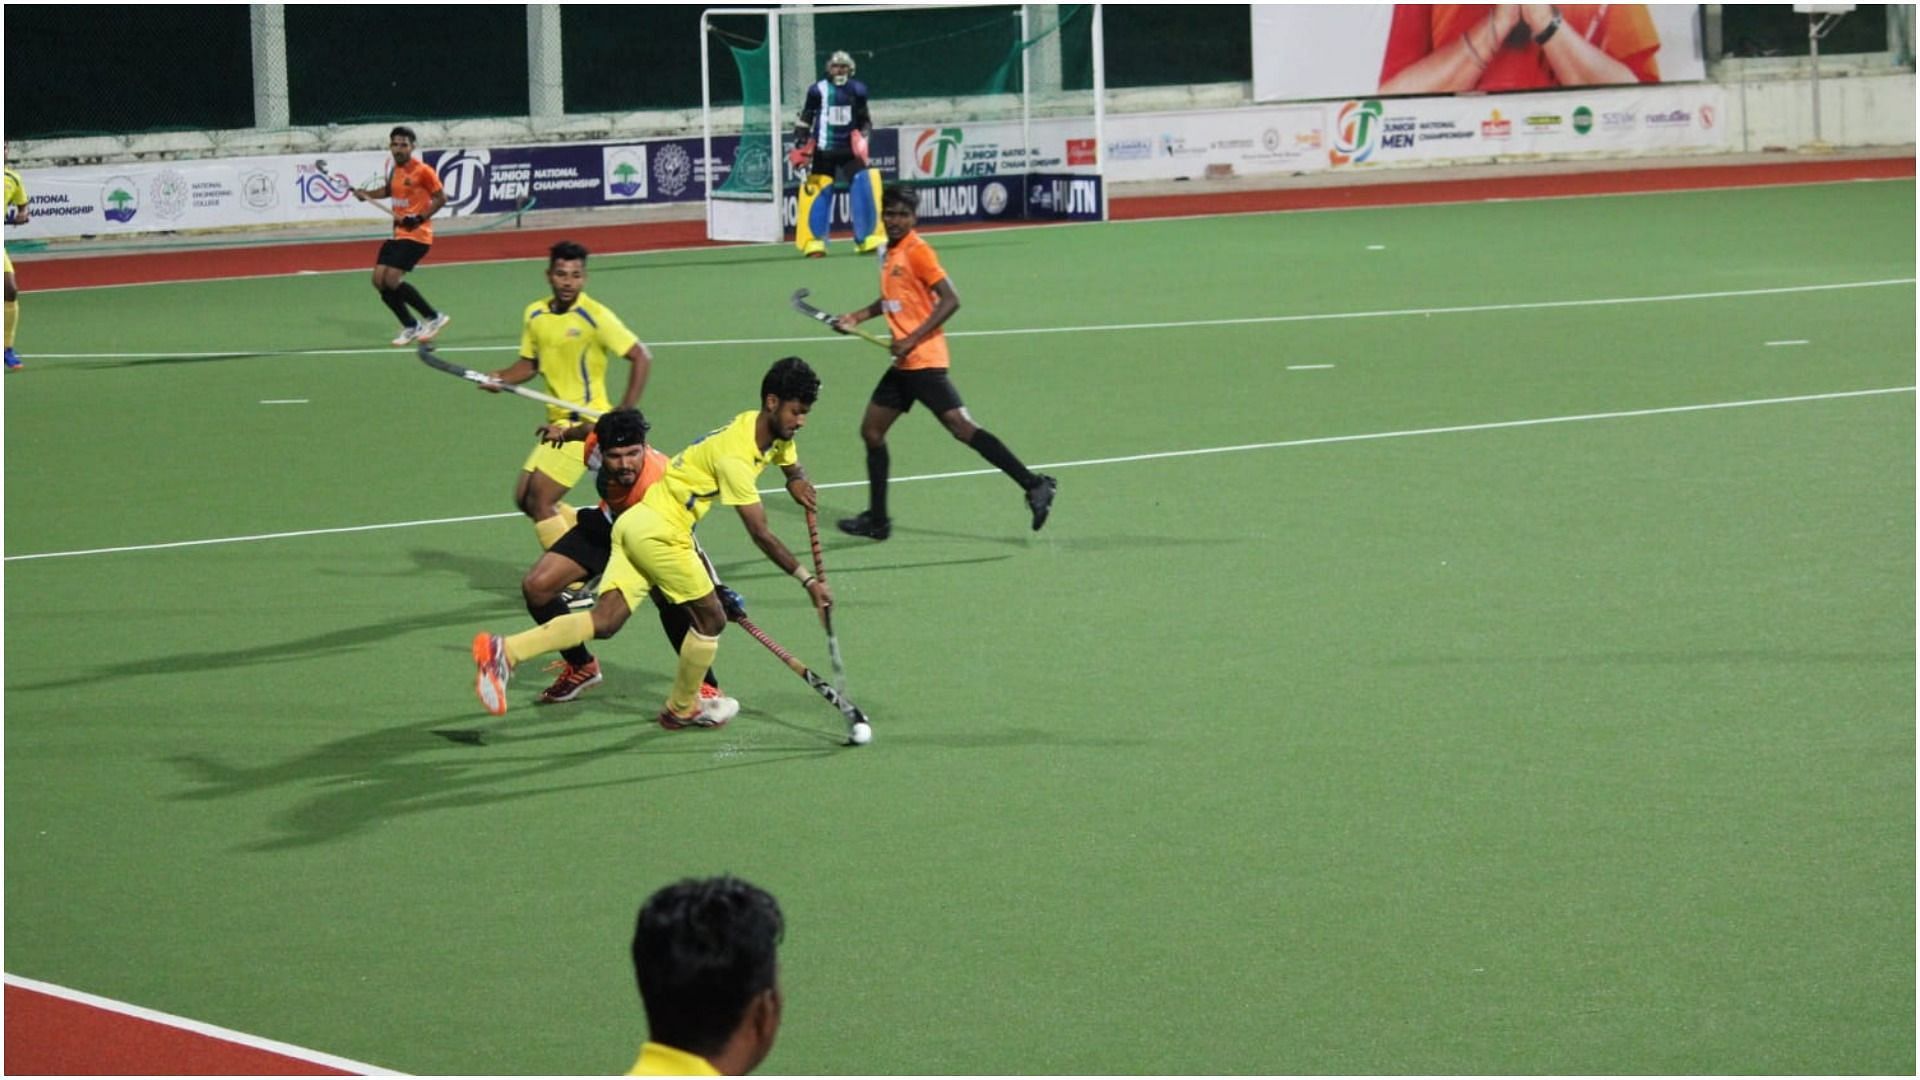 Action from 11th Hockey India Junior Men National Championship 2021 (Pic Credit: Hockey India)